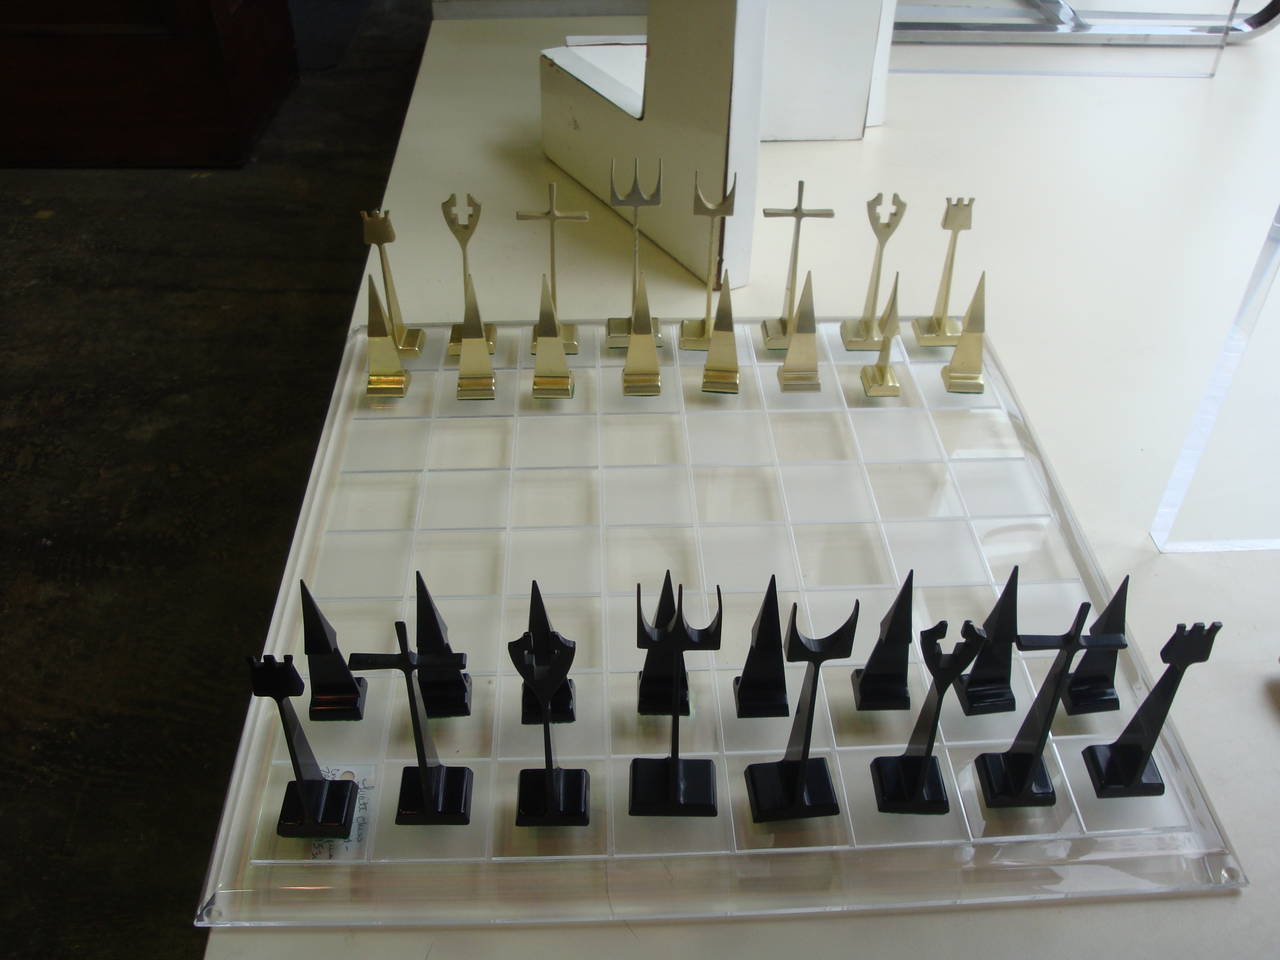 This is a set of aluminum chess pieces designed in 1962 for Austin Enterprises and a newly made lucite board